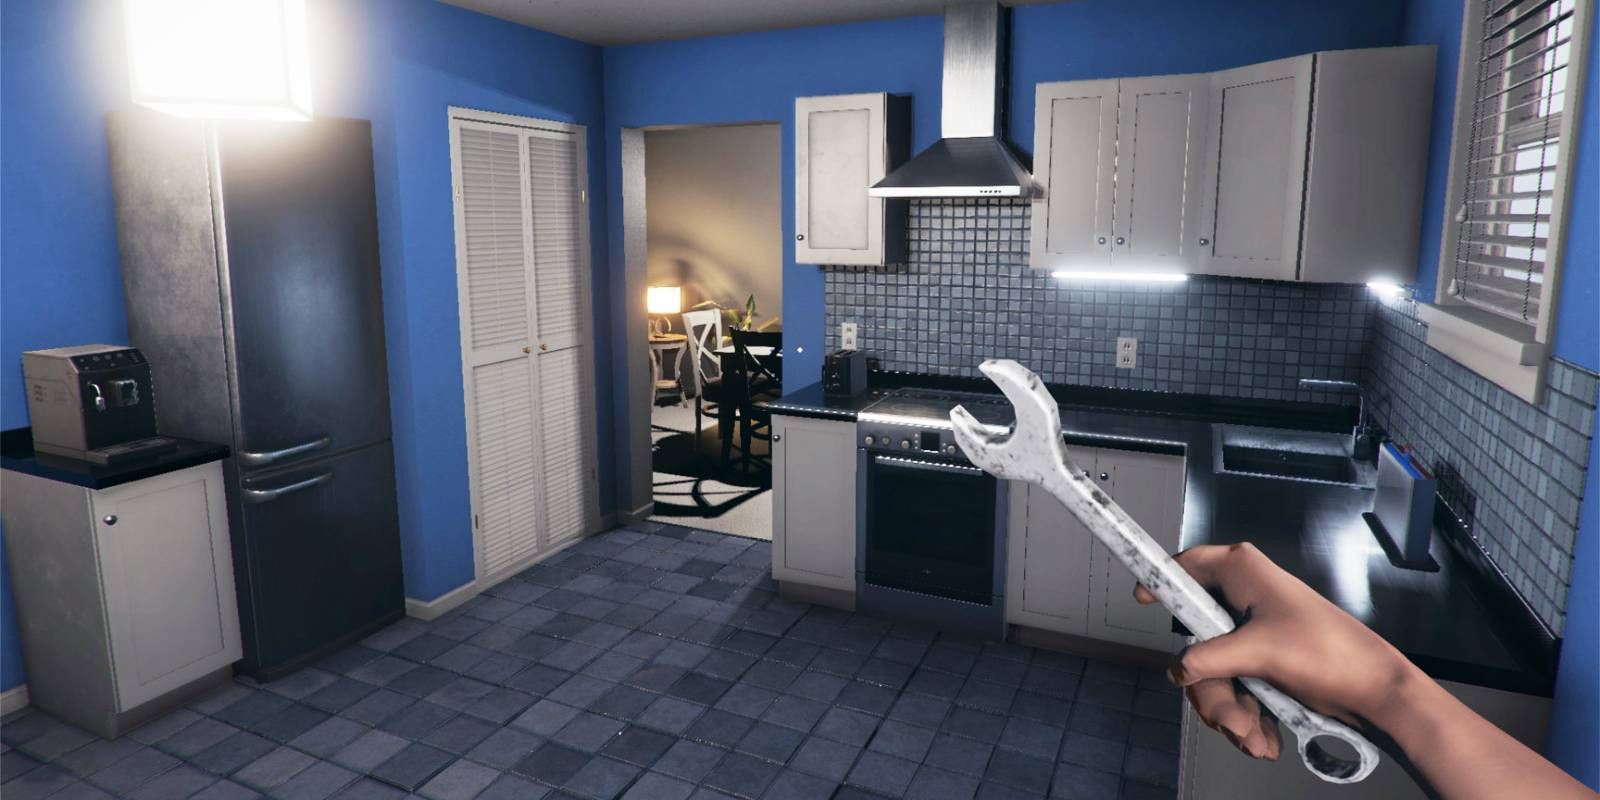 Game: House Flipper Review